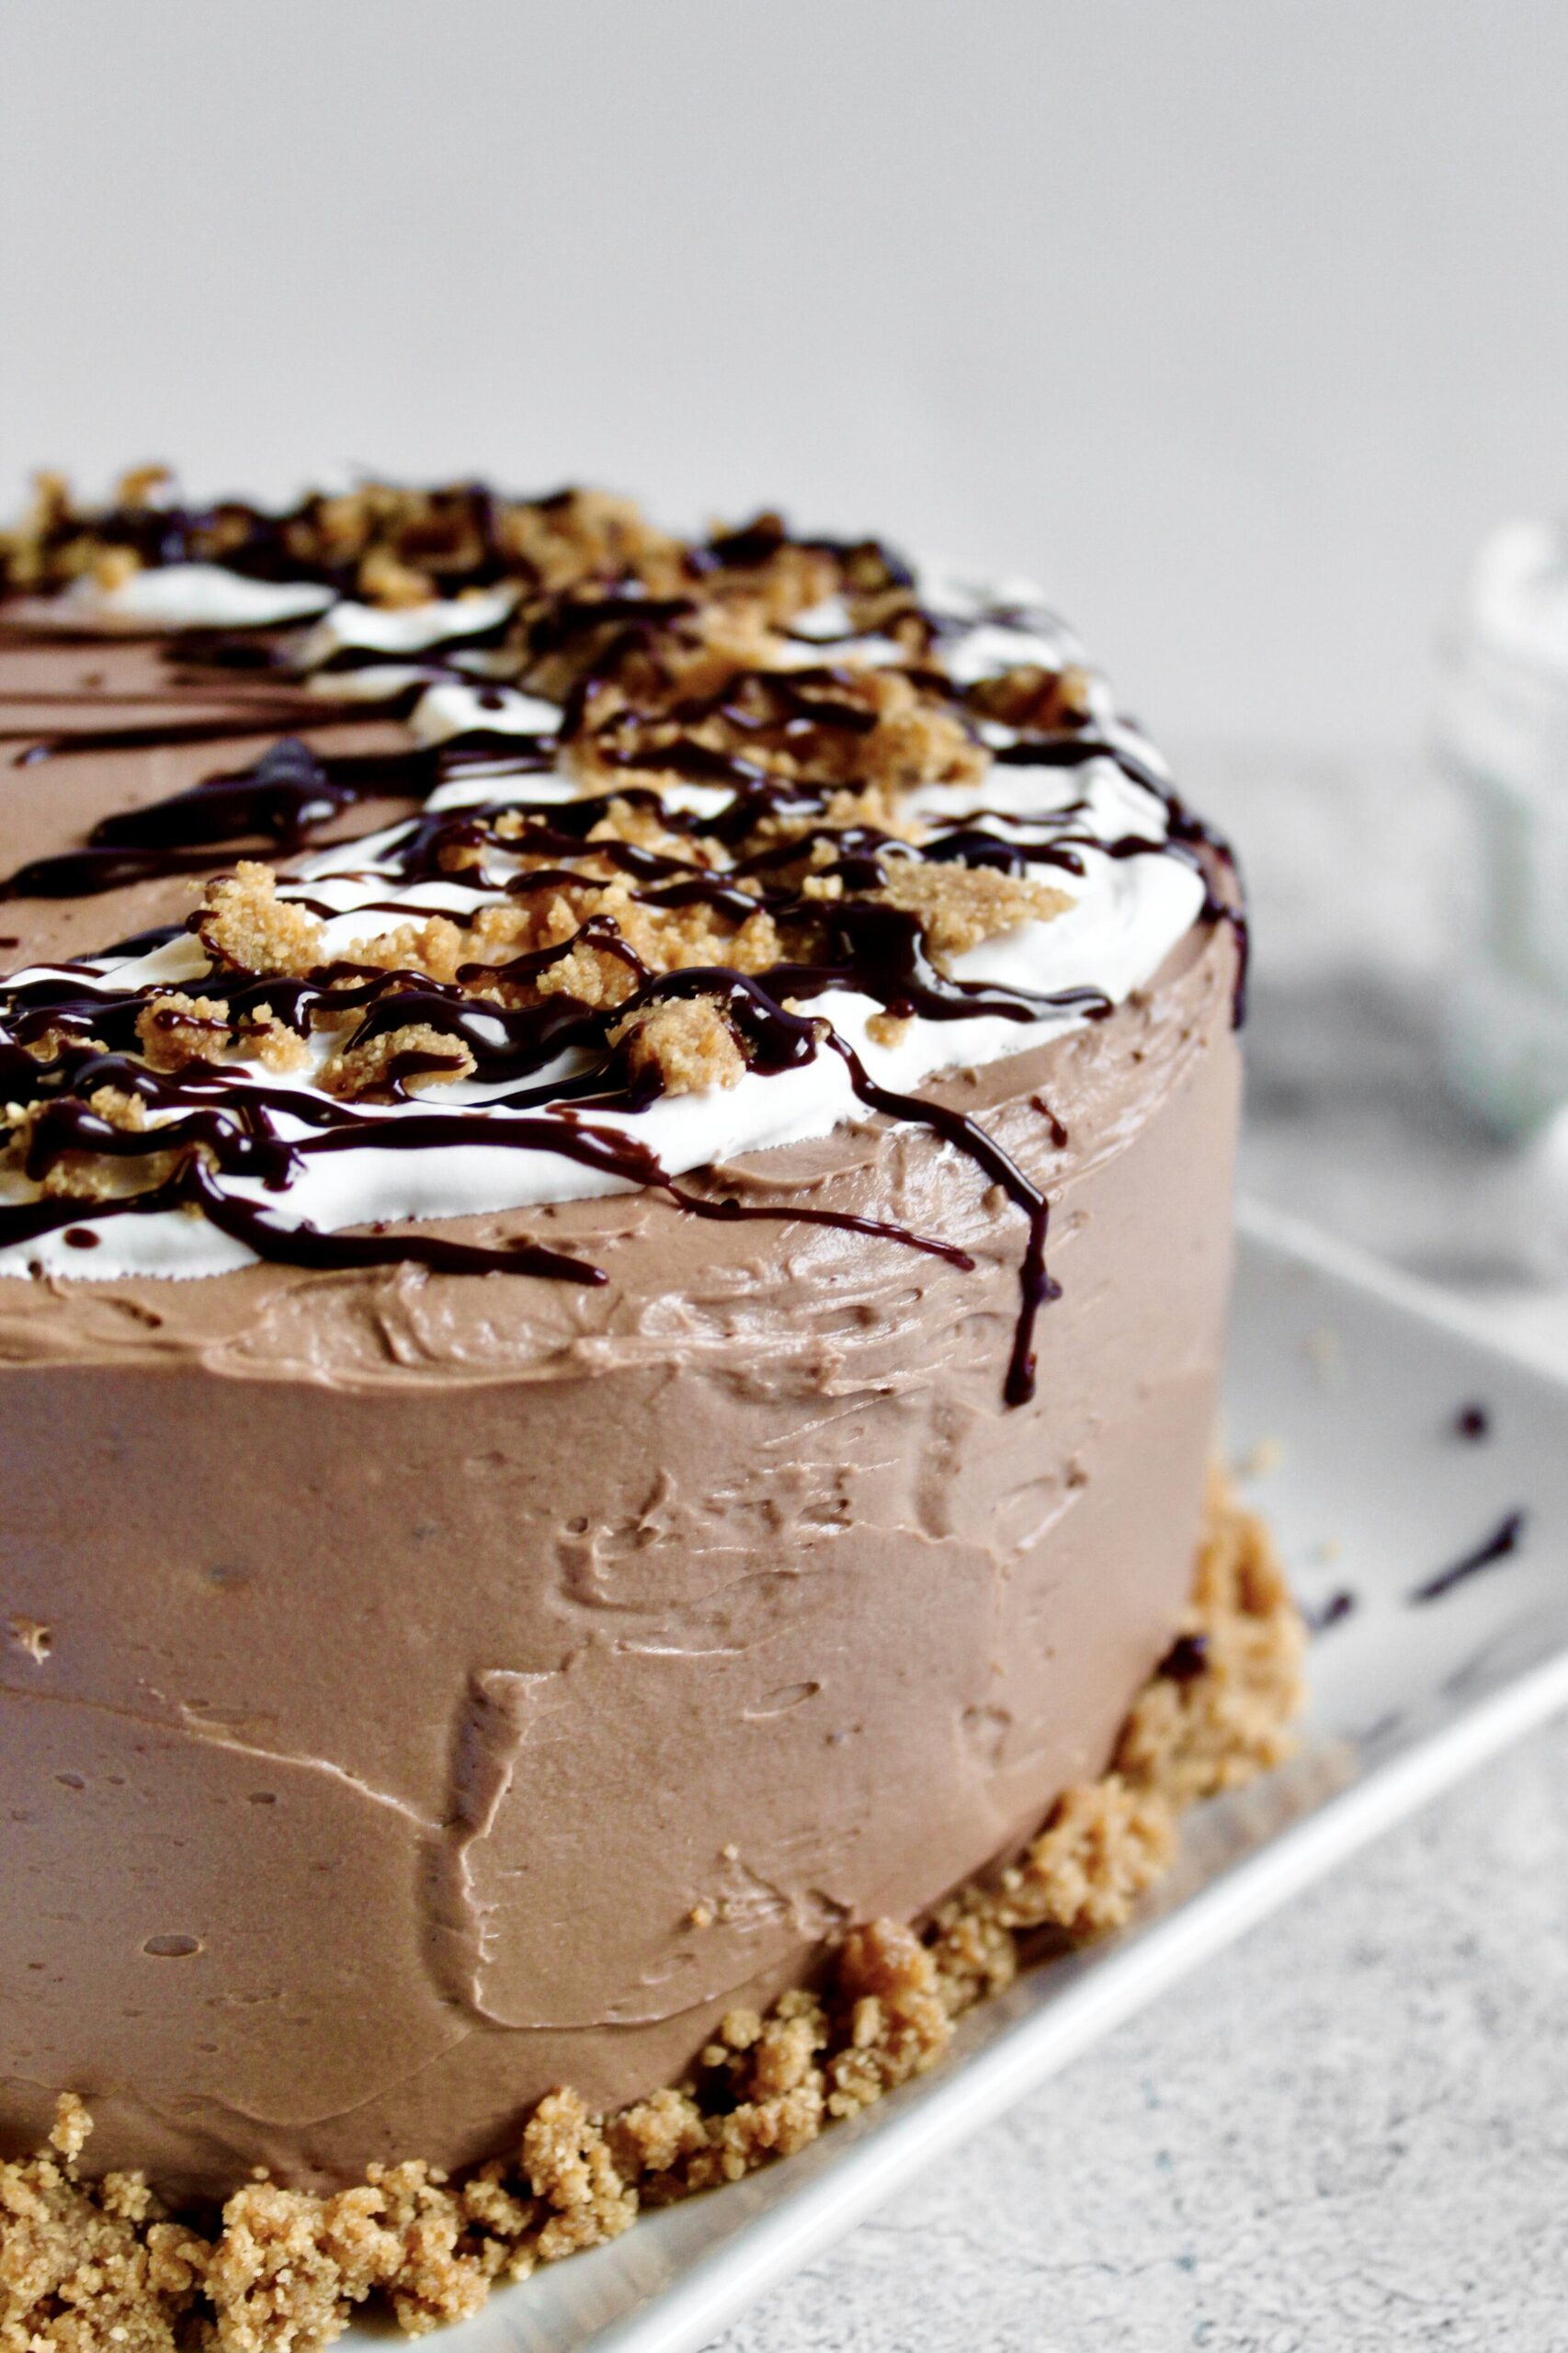  Chocolate marshmallow frosting that's to die for.